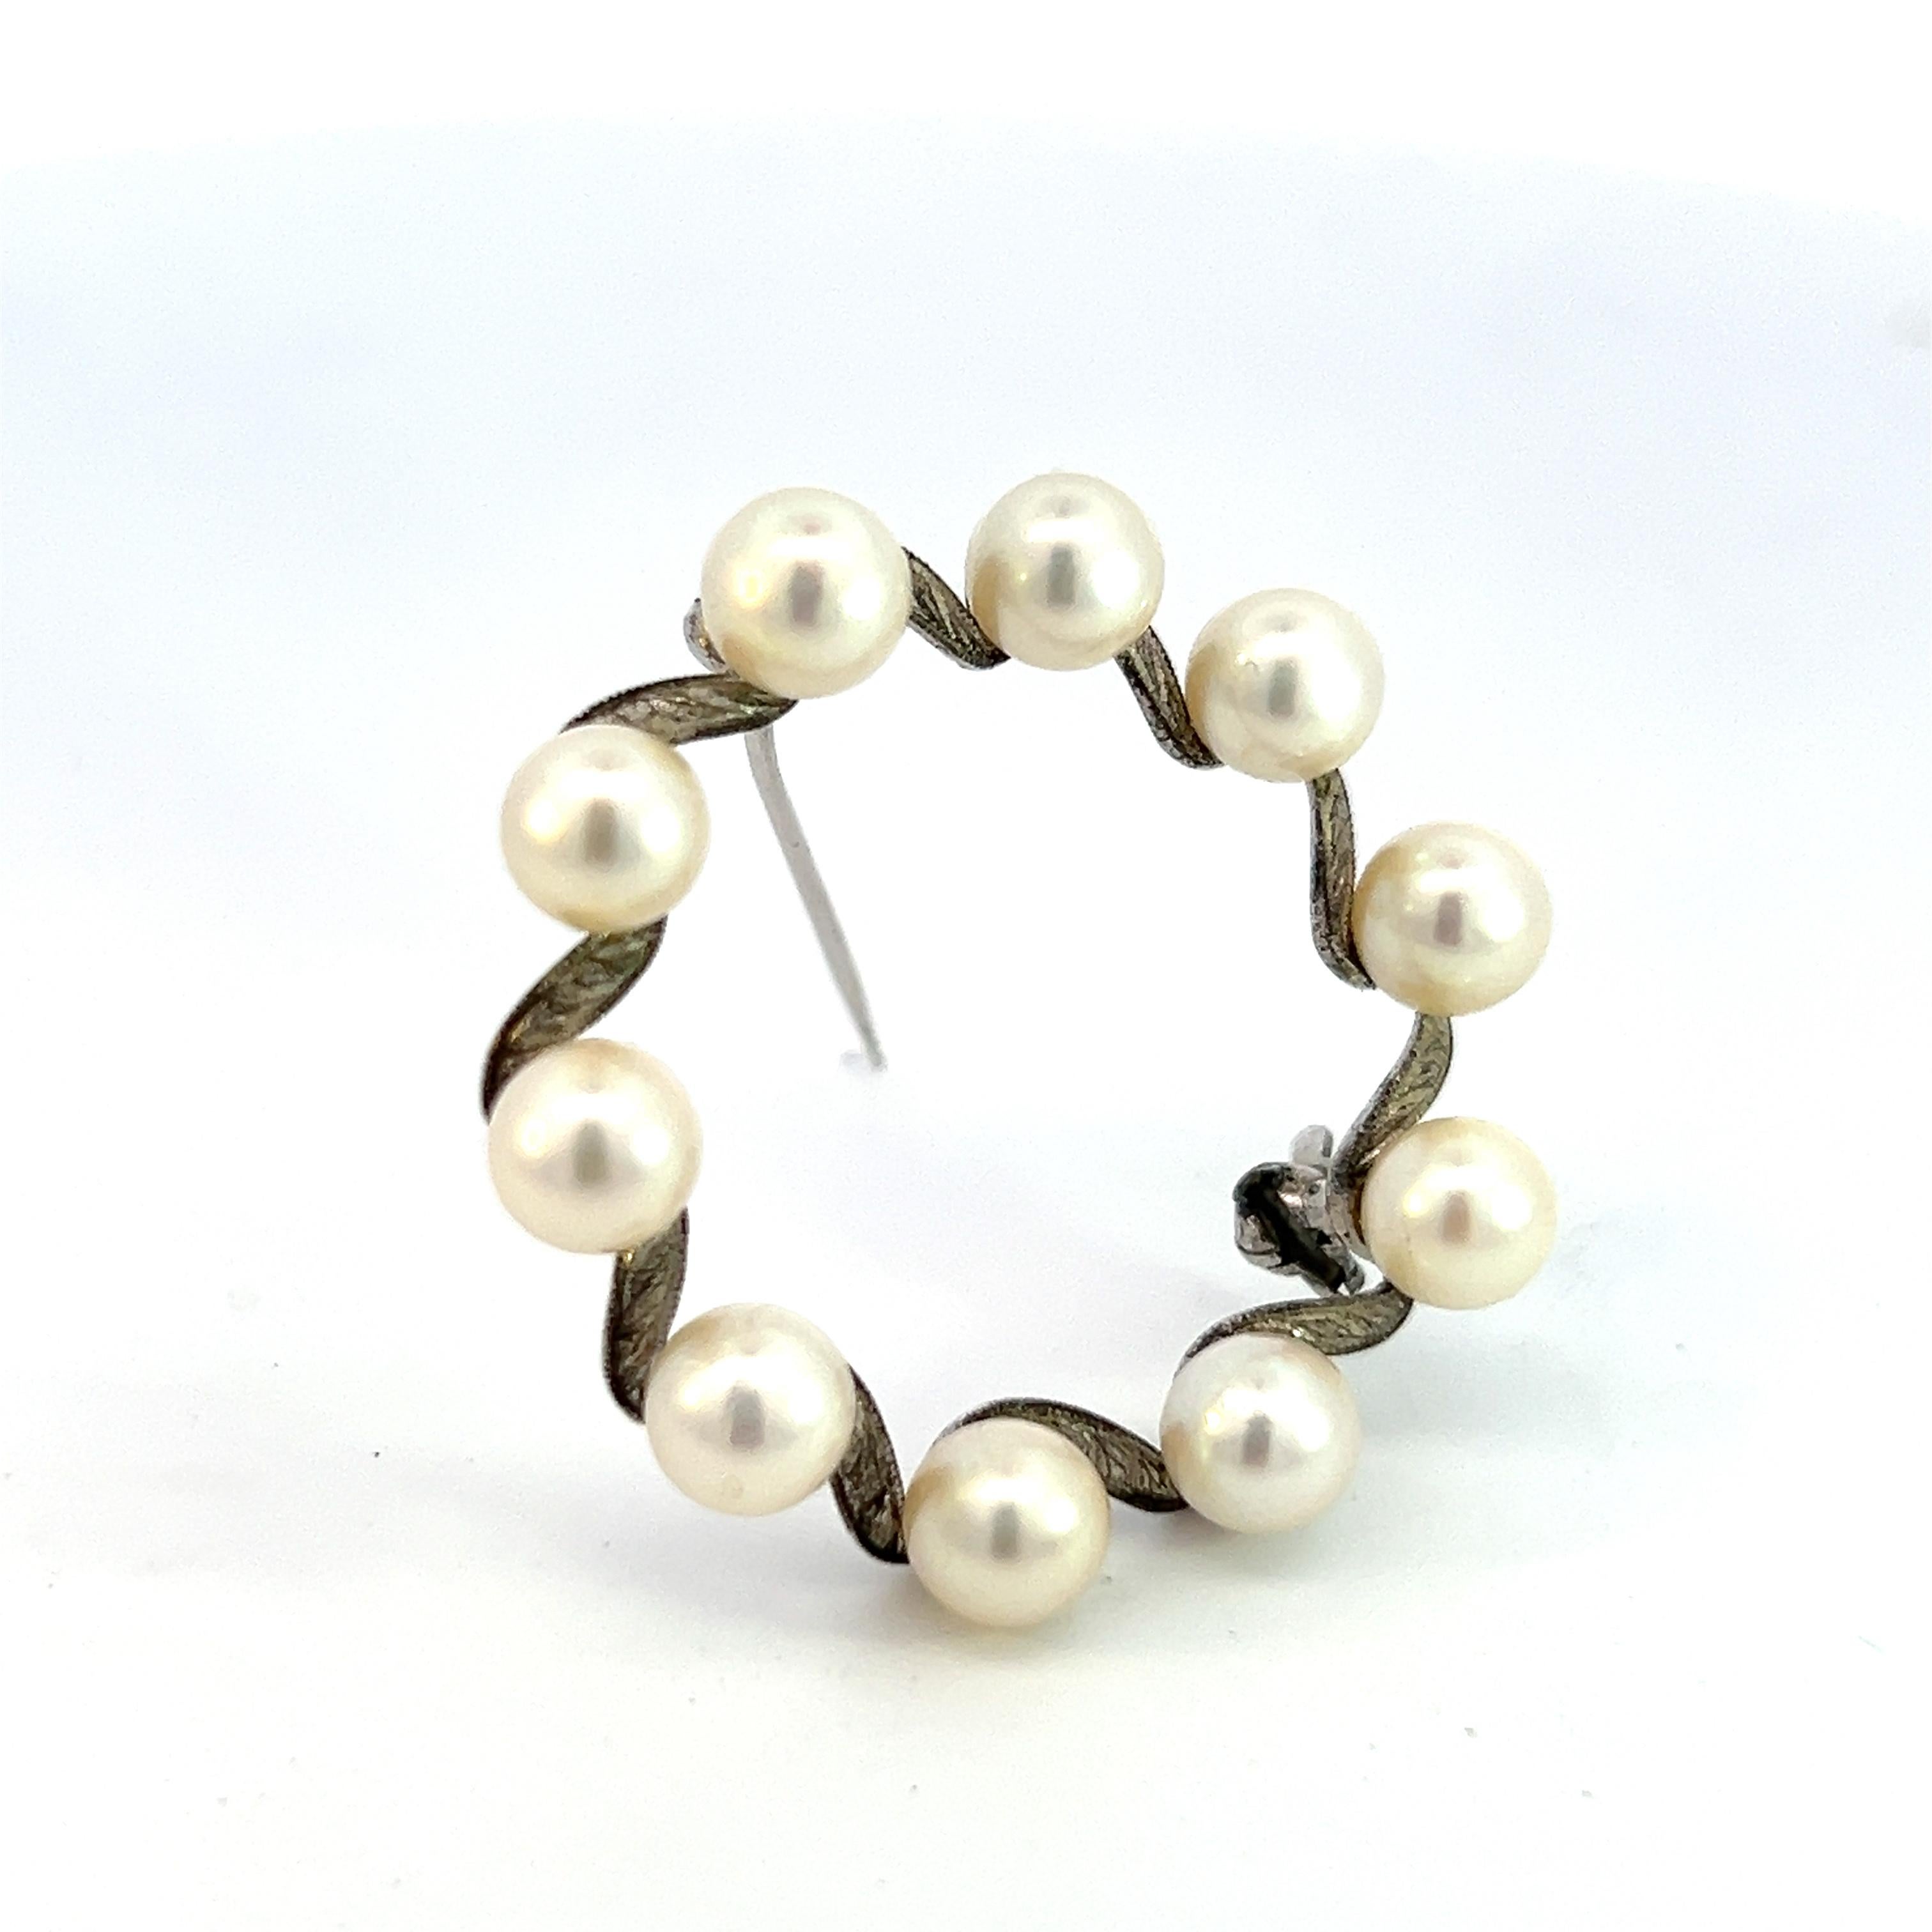 Authentic Mikimoto Estate Akoya Pearl Brooch Pin Sterling Silver 6 mm M335

This elegant Authentic Mikimoto Estate Akoya pearl brooch pin is made of sterling silver and has 10 Akoya Cultured Pearls ranging in size from 6 mm and a weight of 5.3